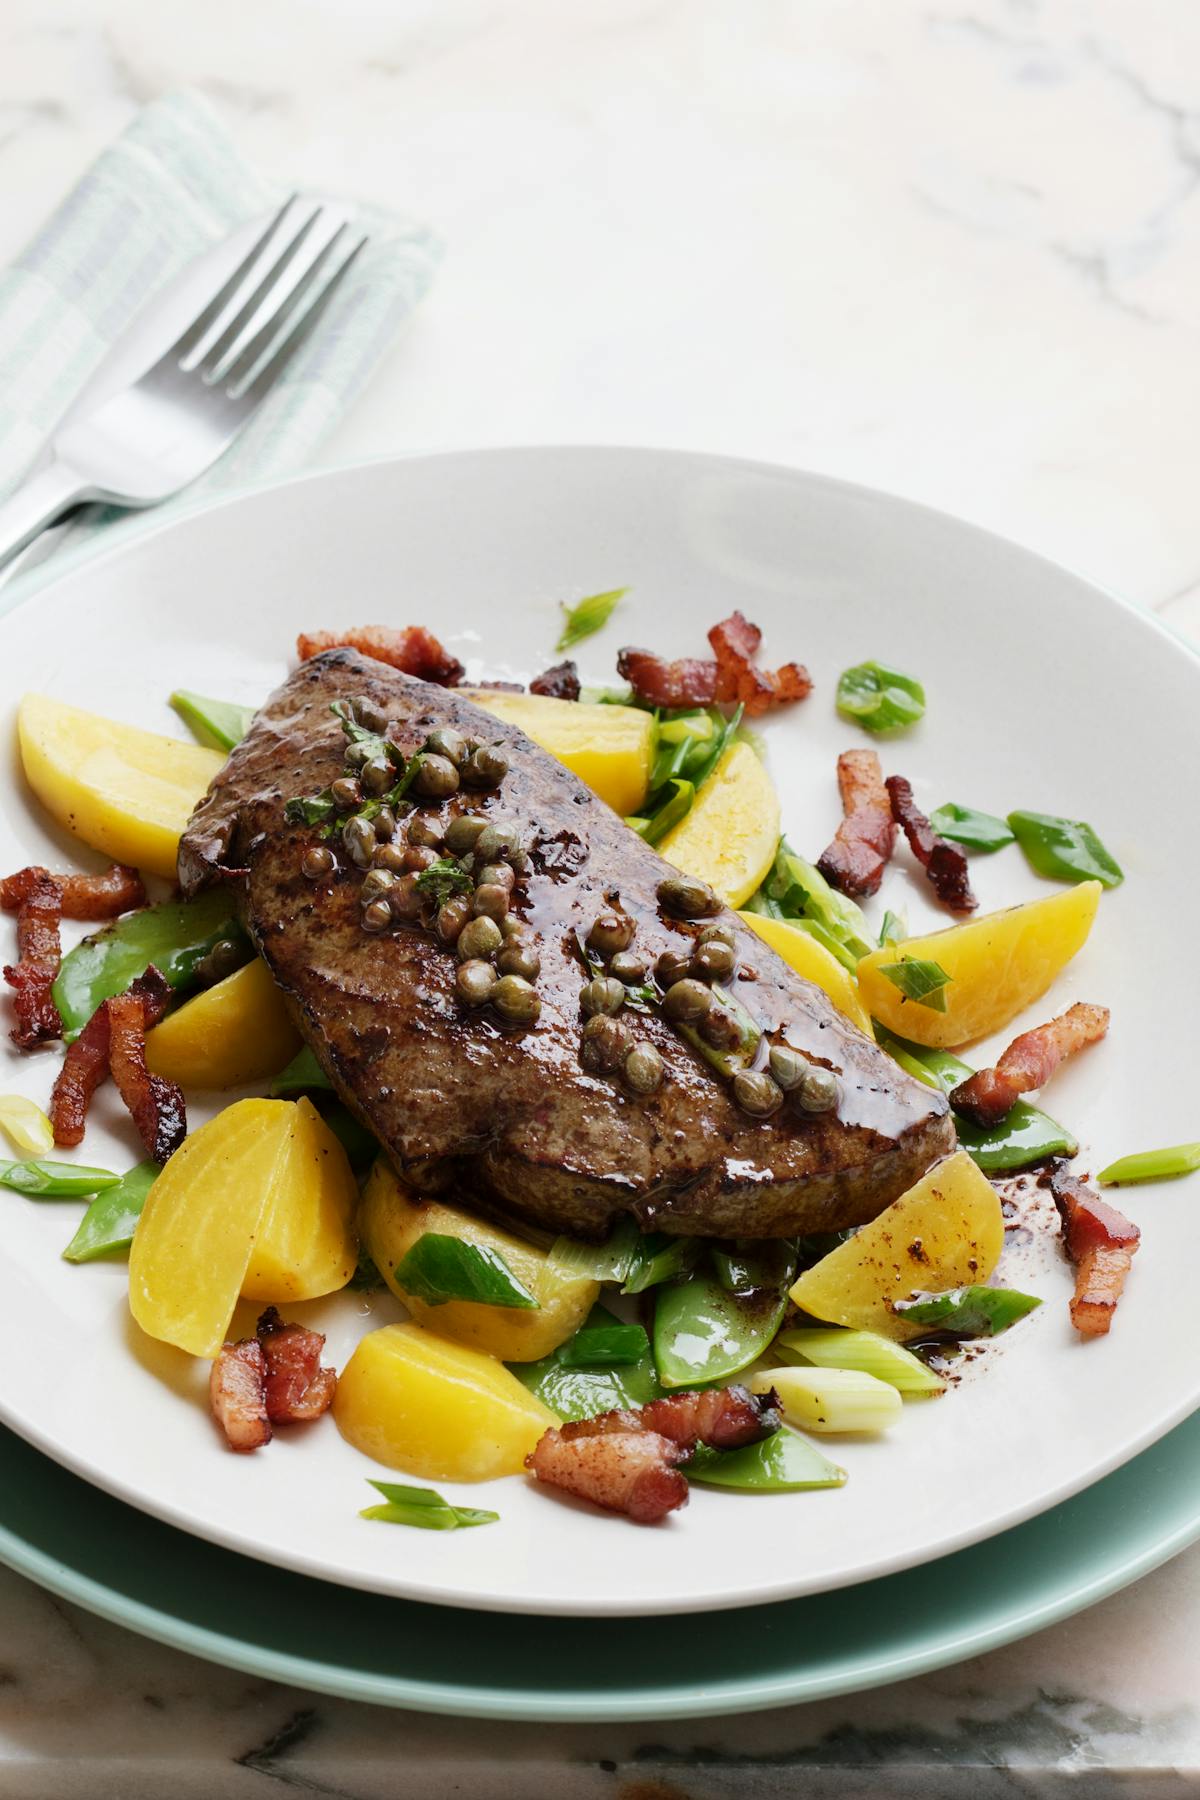 Veal liver with bacon and butter-fried veggies